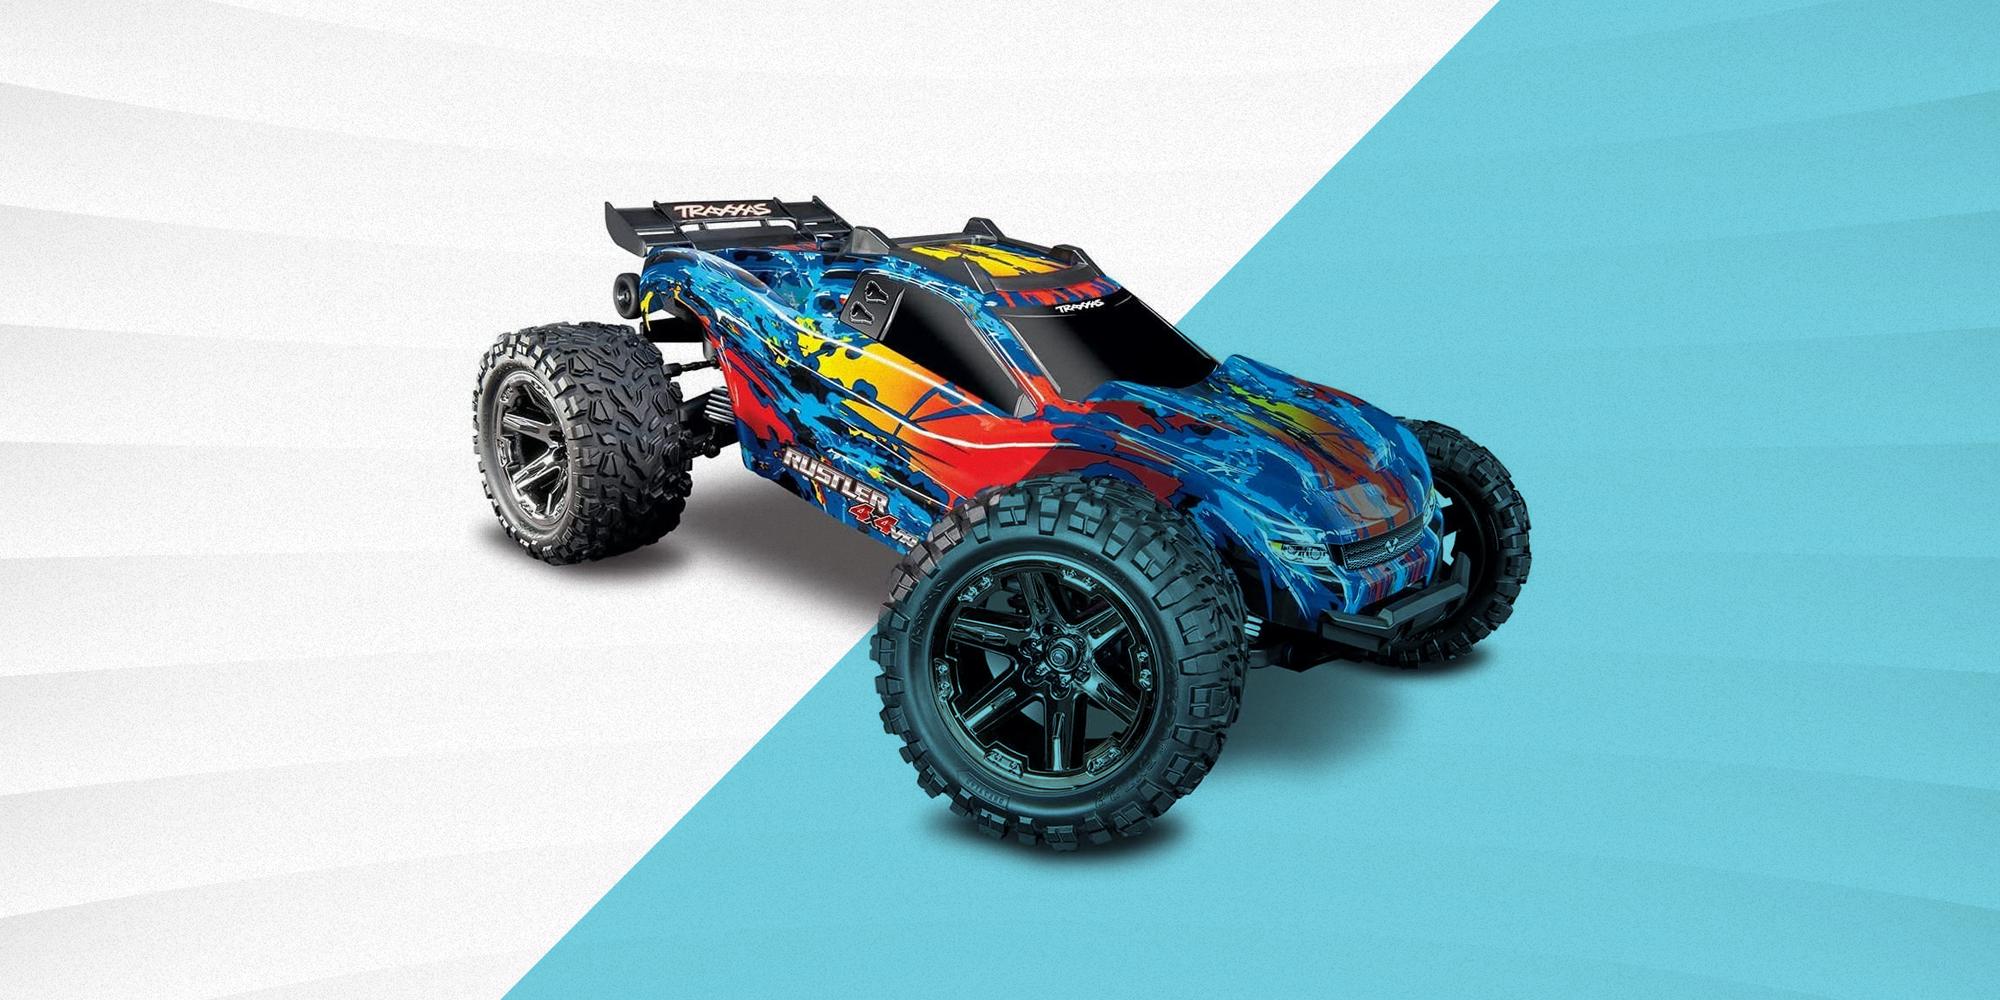 Best Rc Buggy For Racing: Best Budget-Friendly RC Buggies for Racing